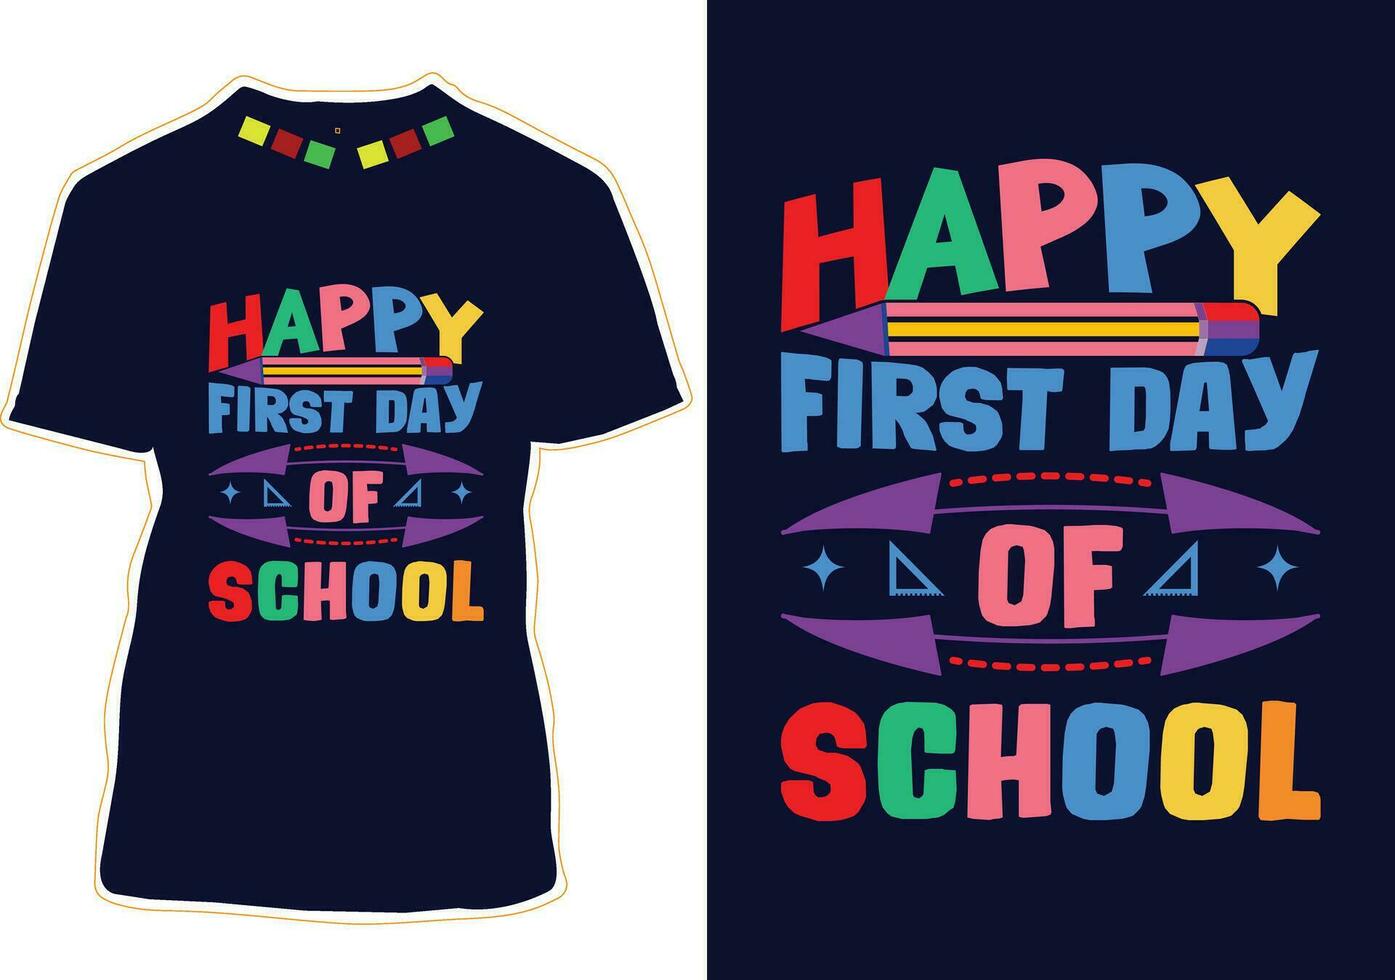 Every Day Is The First Day Of School T-shirt Design vector